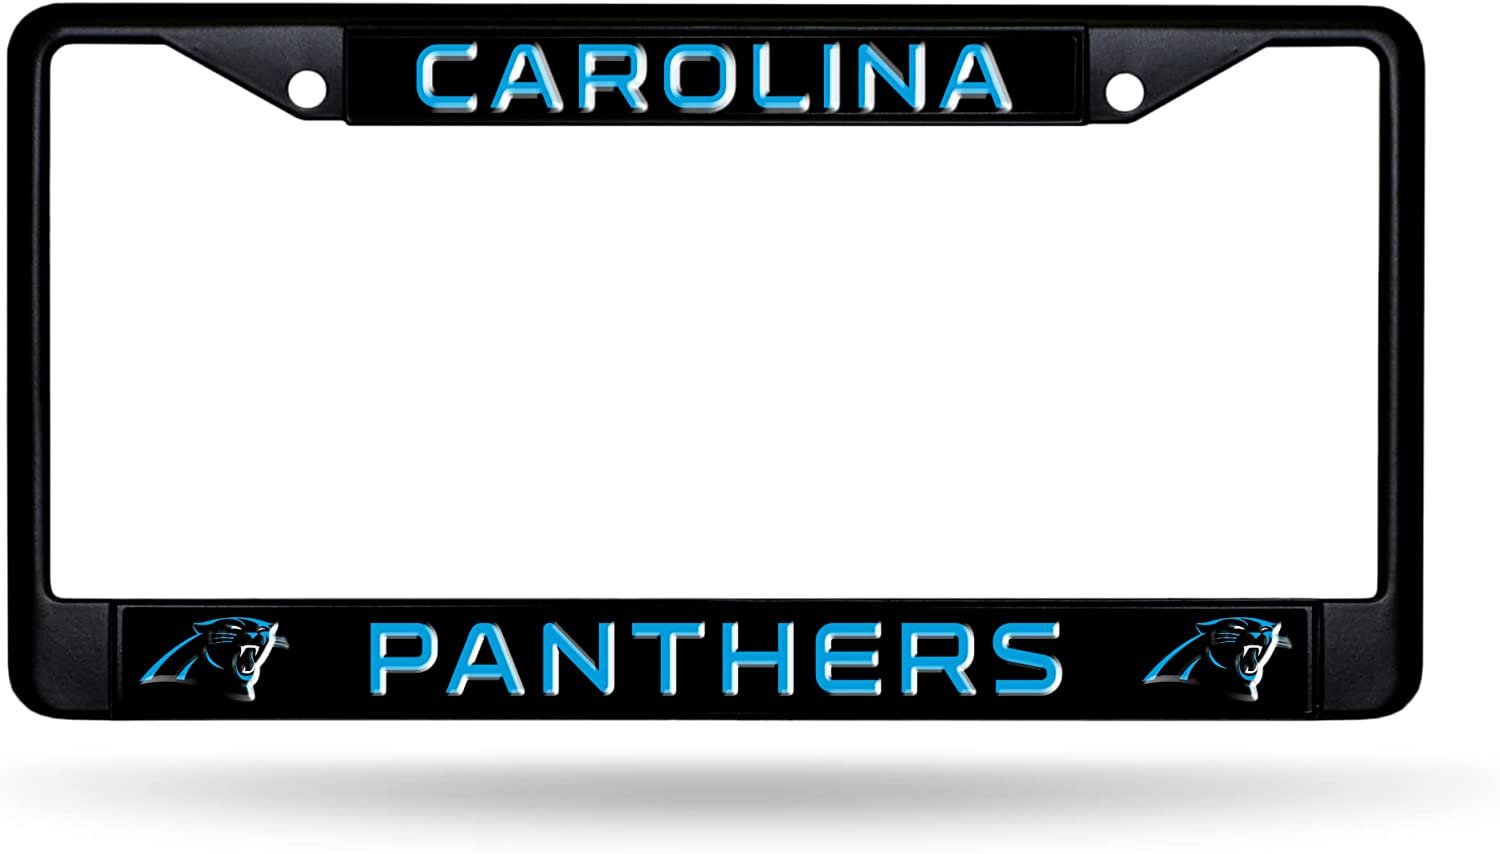 Carolina Panthers Black Metal License Plate Frame Chrome Tag Cover 6x12 Inch